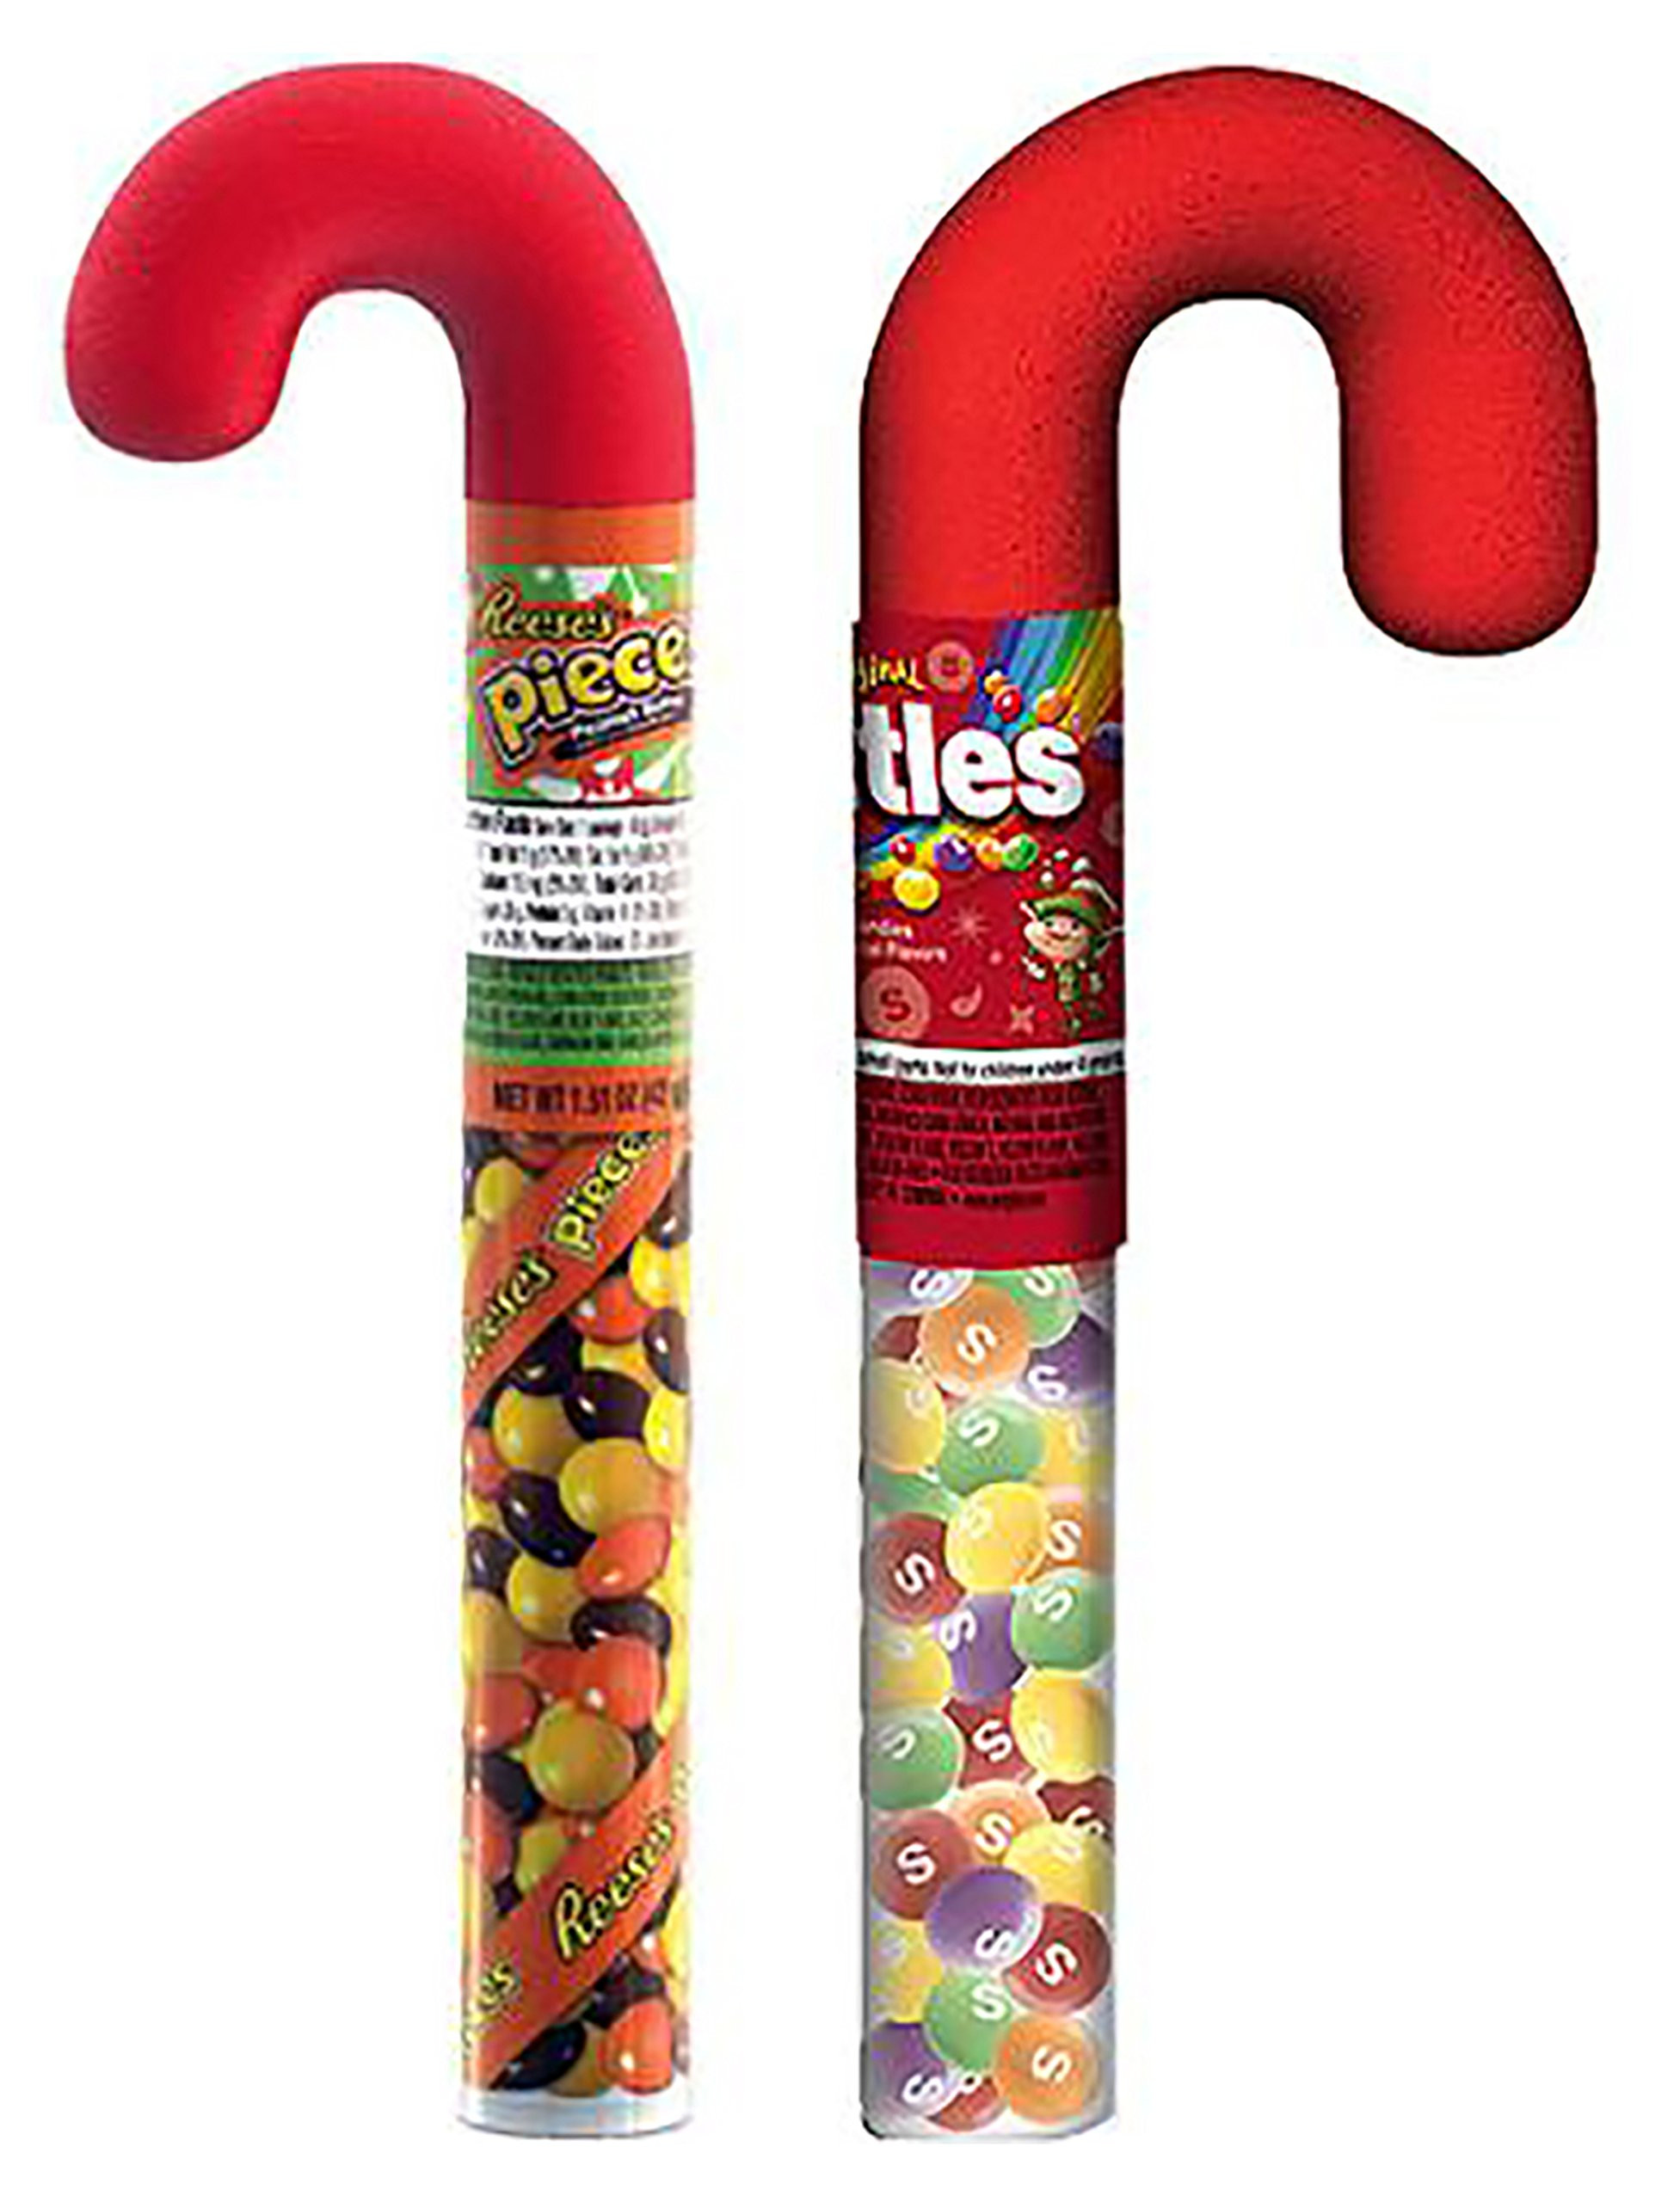 Candy Filled Christmas Stockings Wholesale
 Amazon Milk Chocolate M&M s Holiday Filled Candy